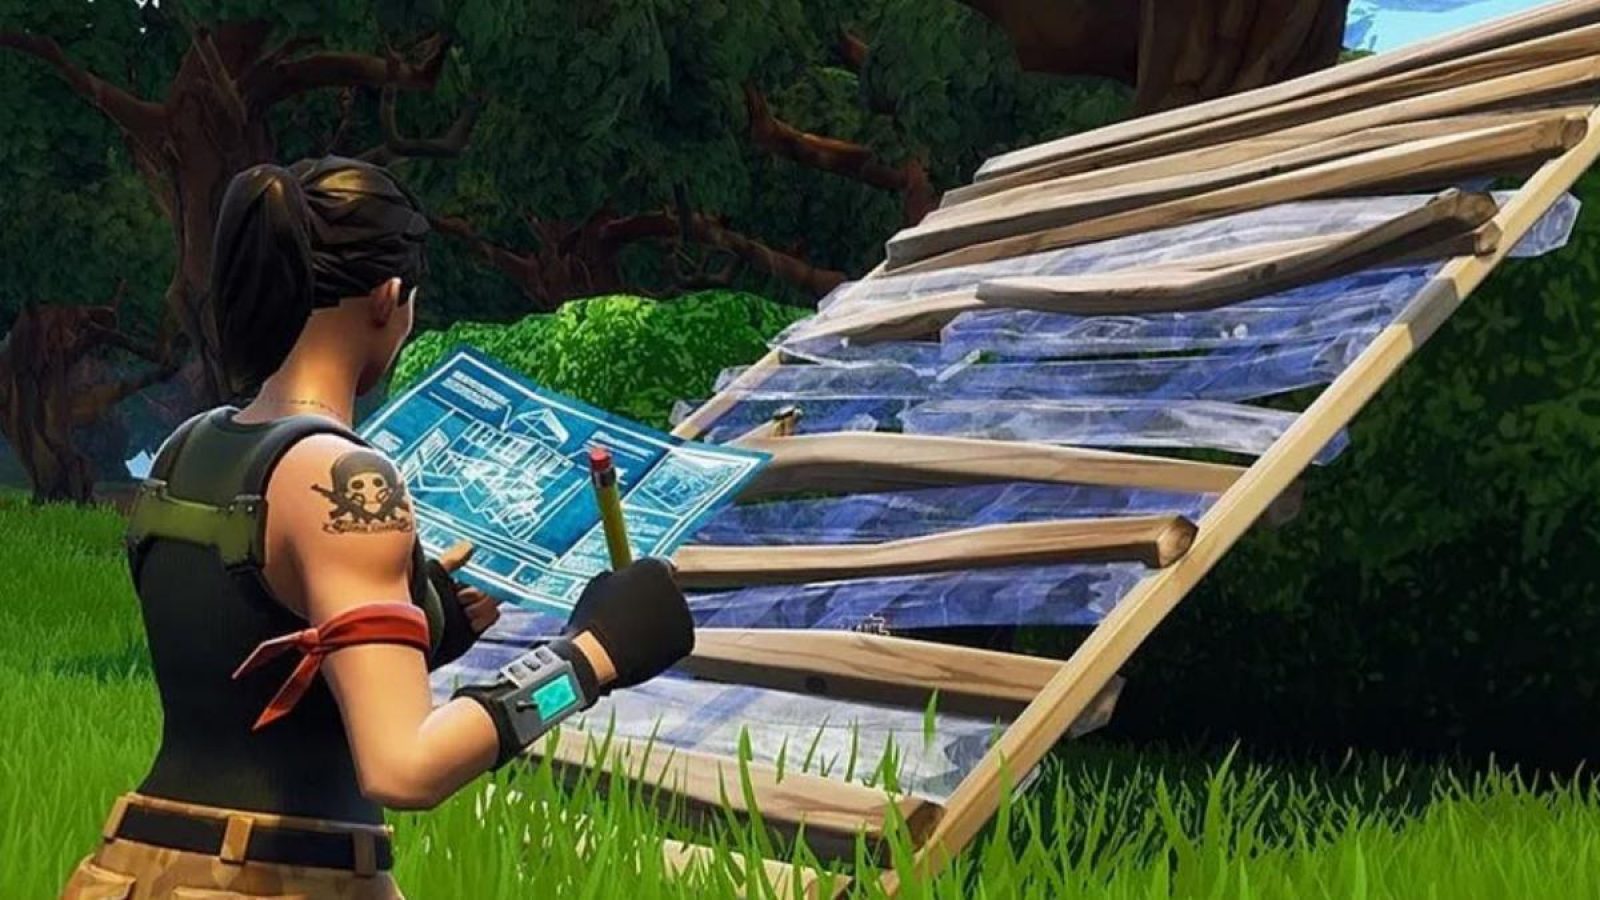 Why Epic Games reverted the Fortnite the Turbo Building nerf so quickly -  Inven Global